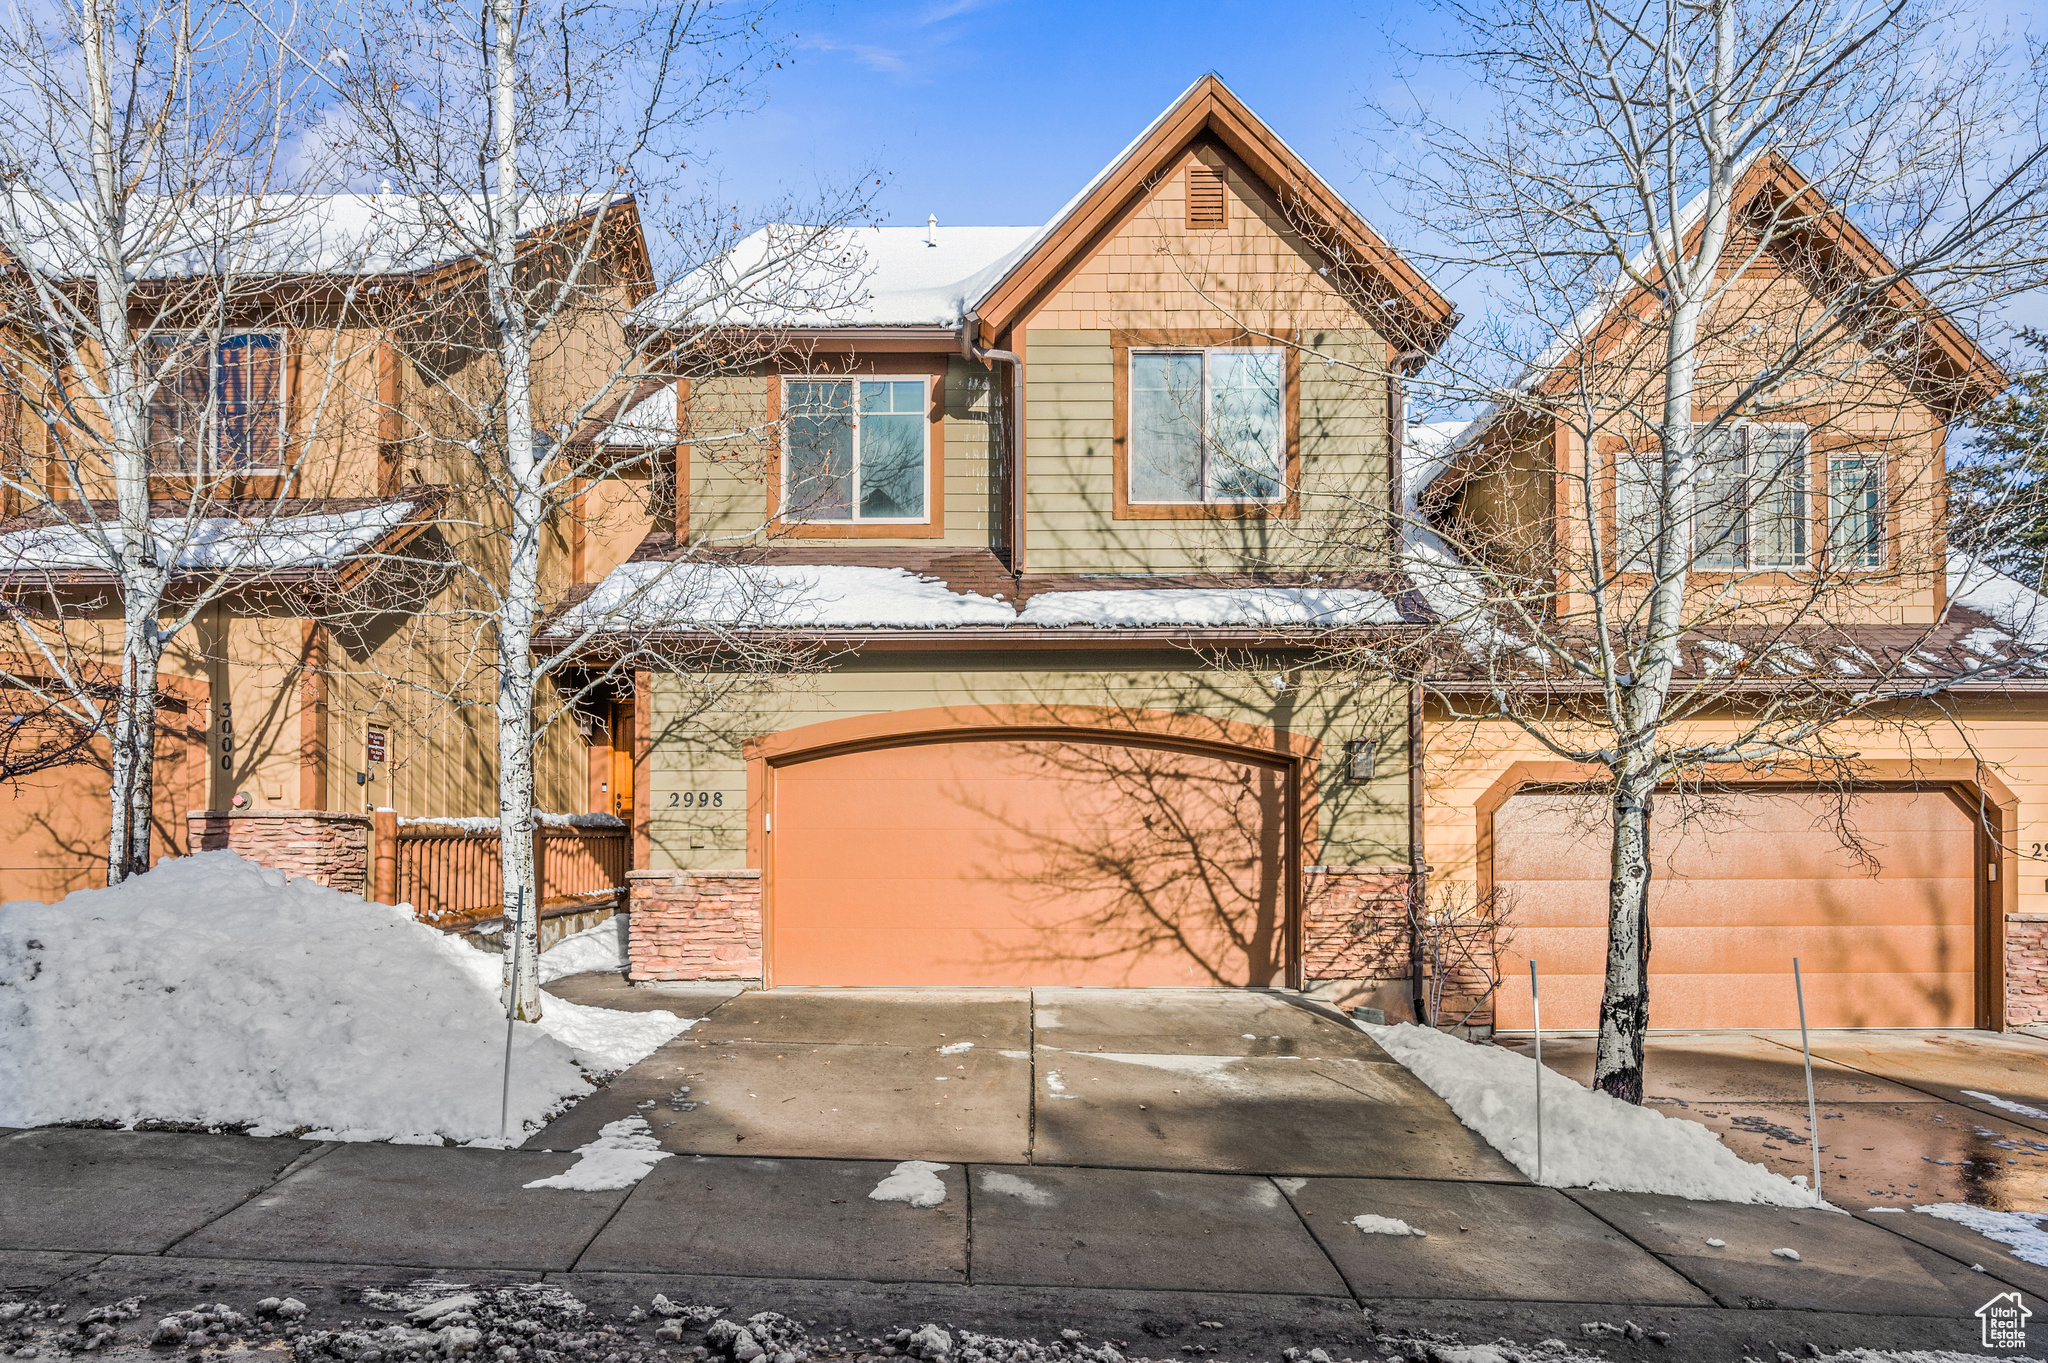 2998 CANYON LINK, Park City, Utah 84098, 4 Bedrooms Bedrooms, 15 Rooms Rooms,2 BathroomsBathrooms,Residential,For sale,CANYON LINK,1981943